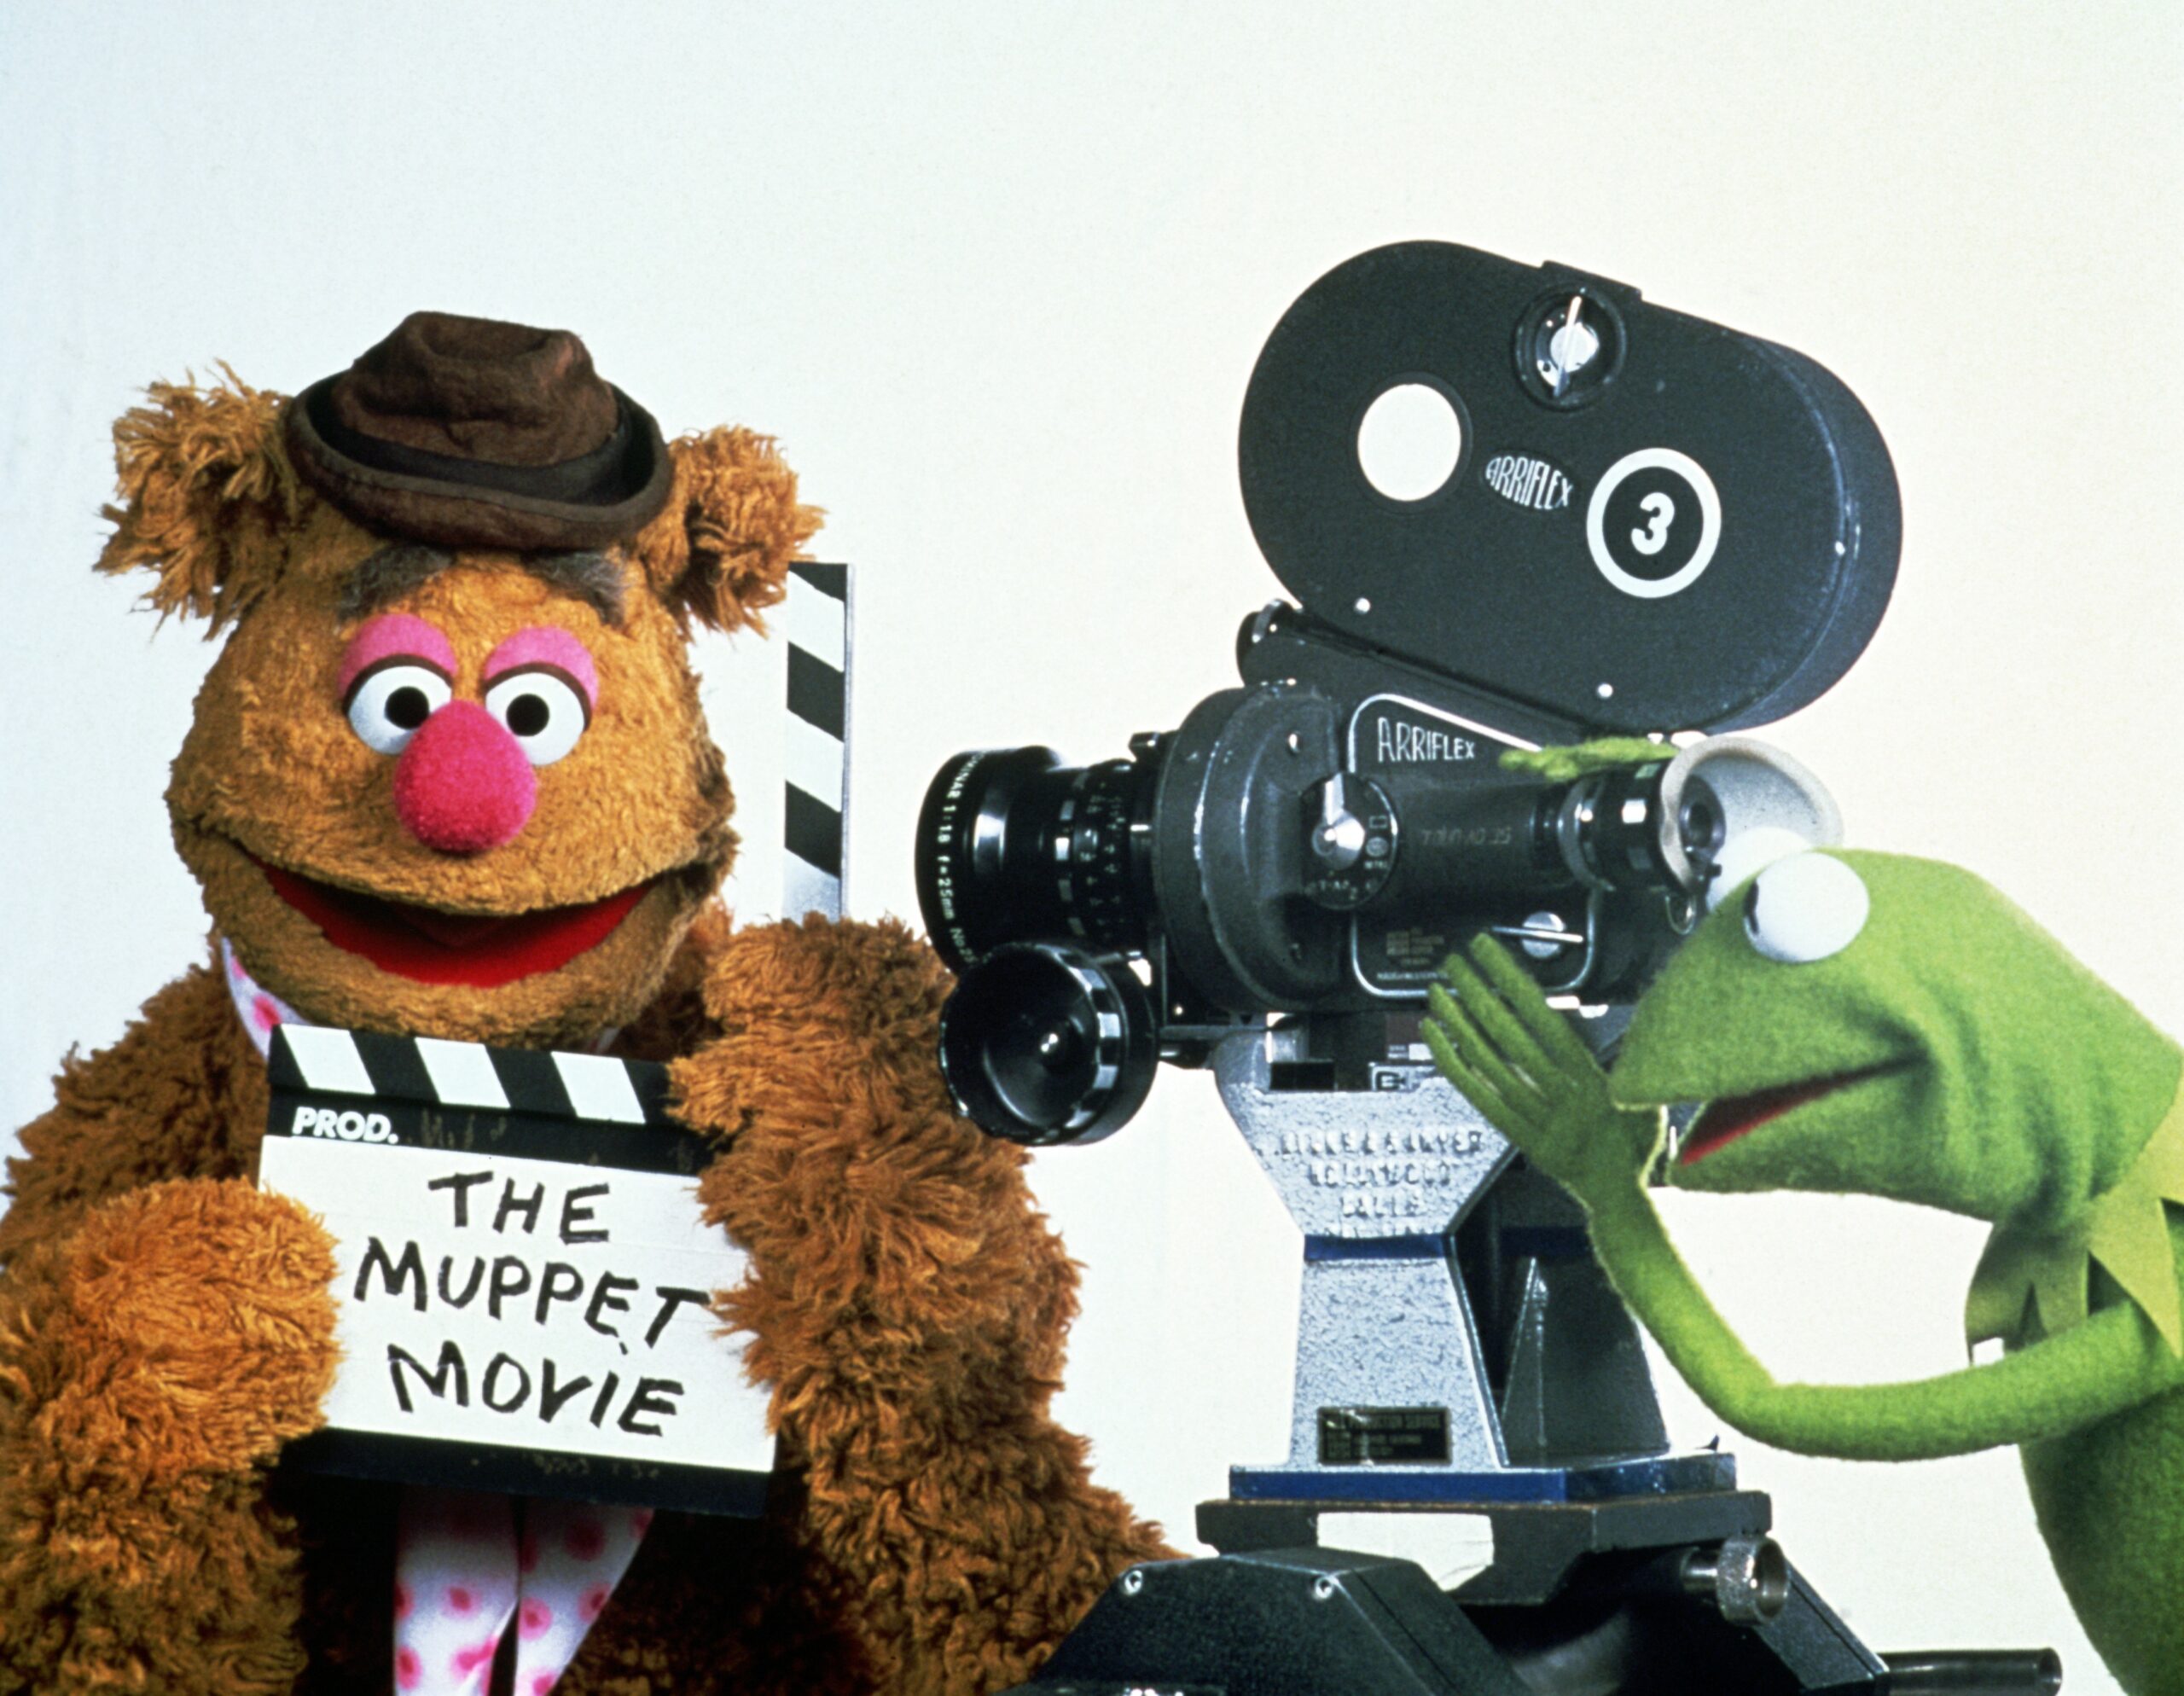 Fozzie Bear and Kermit the Frog in the Muppet Movie.